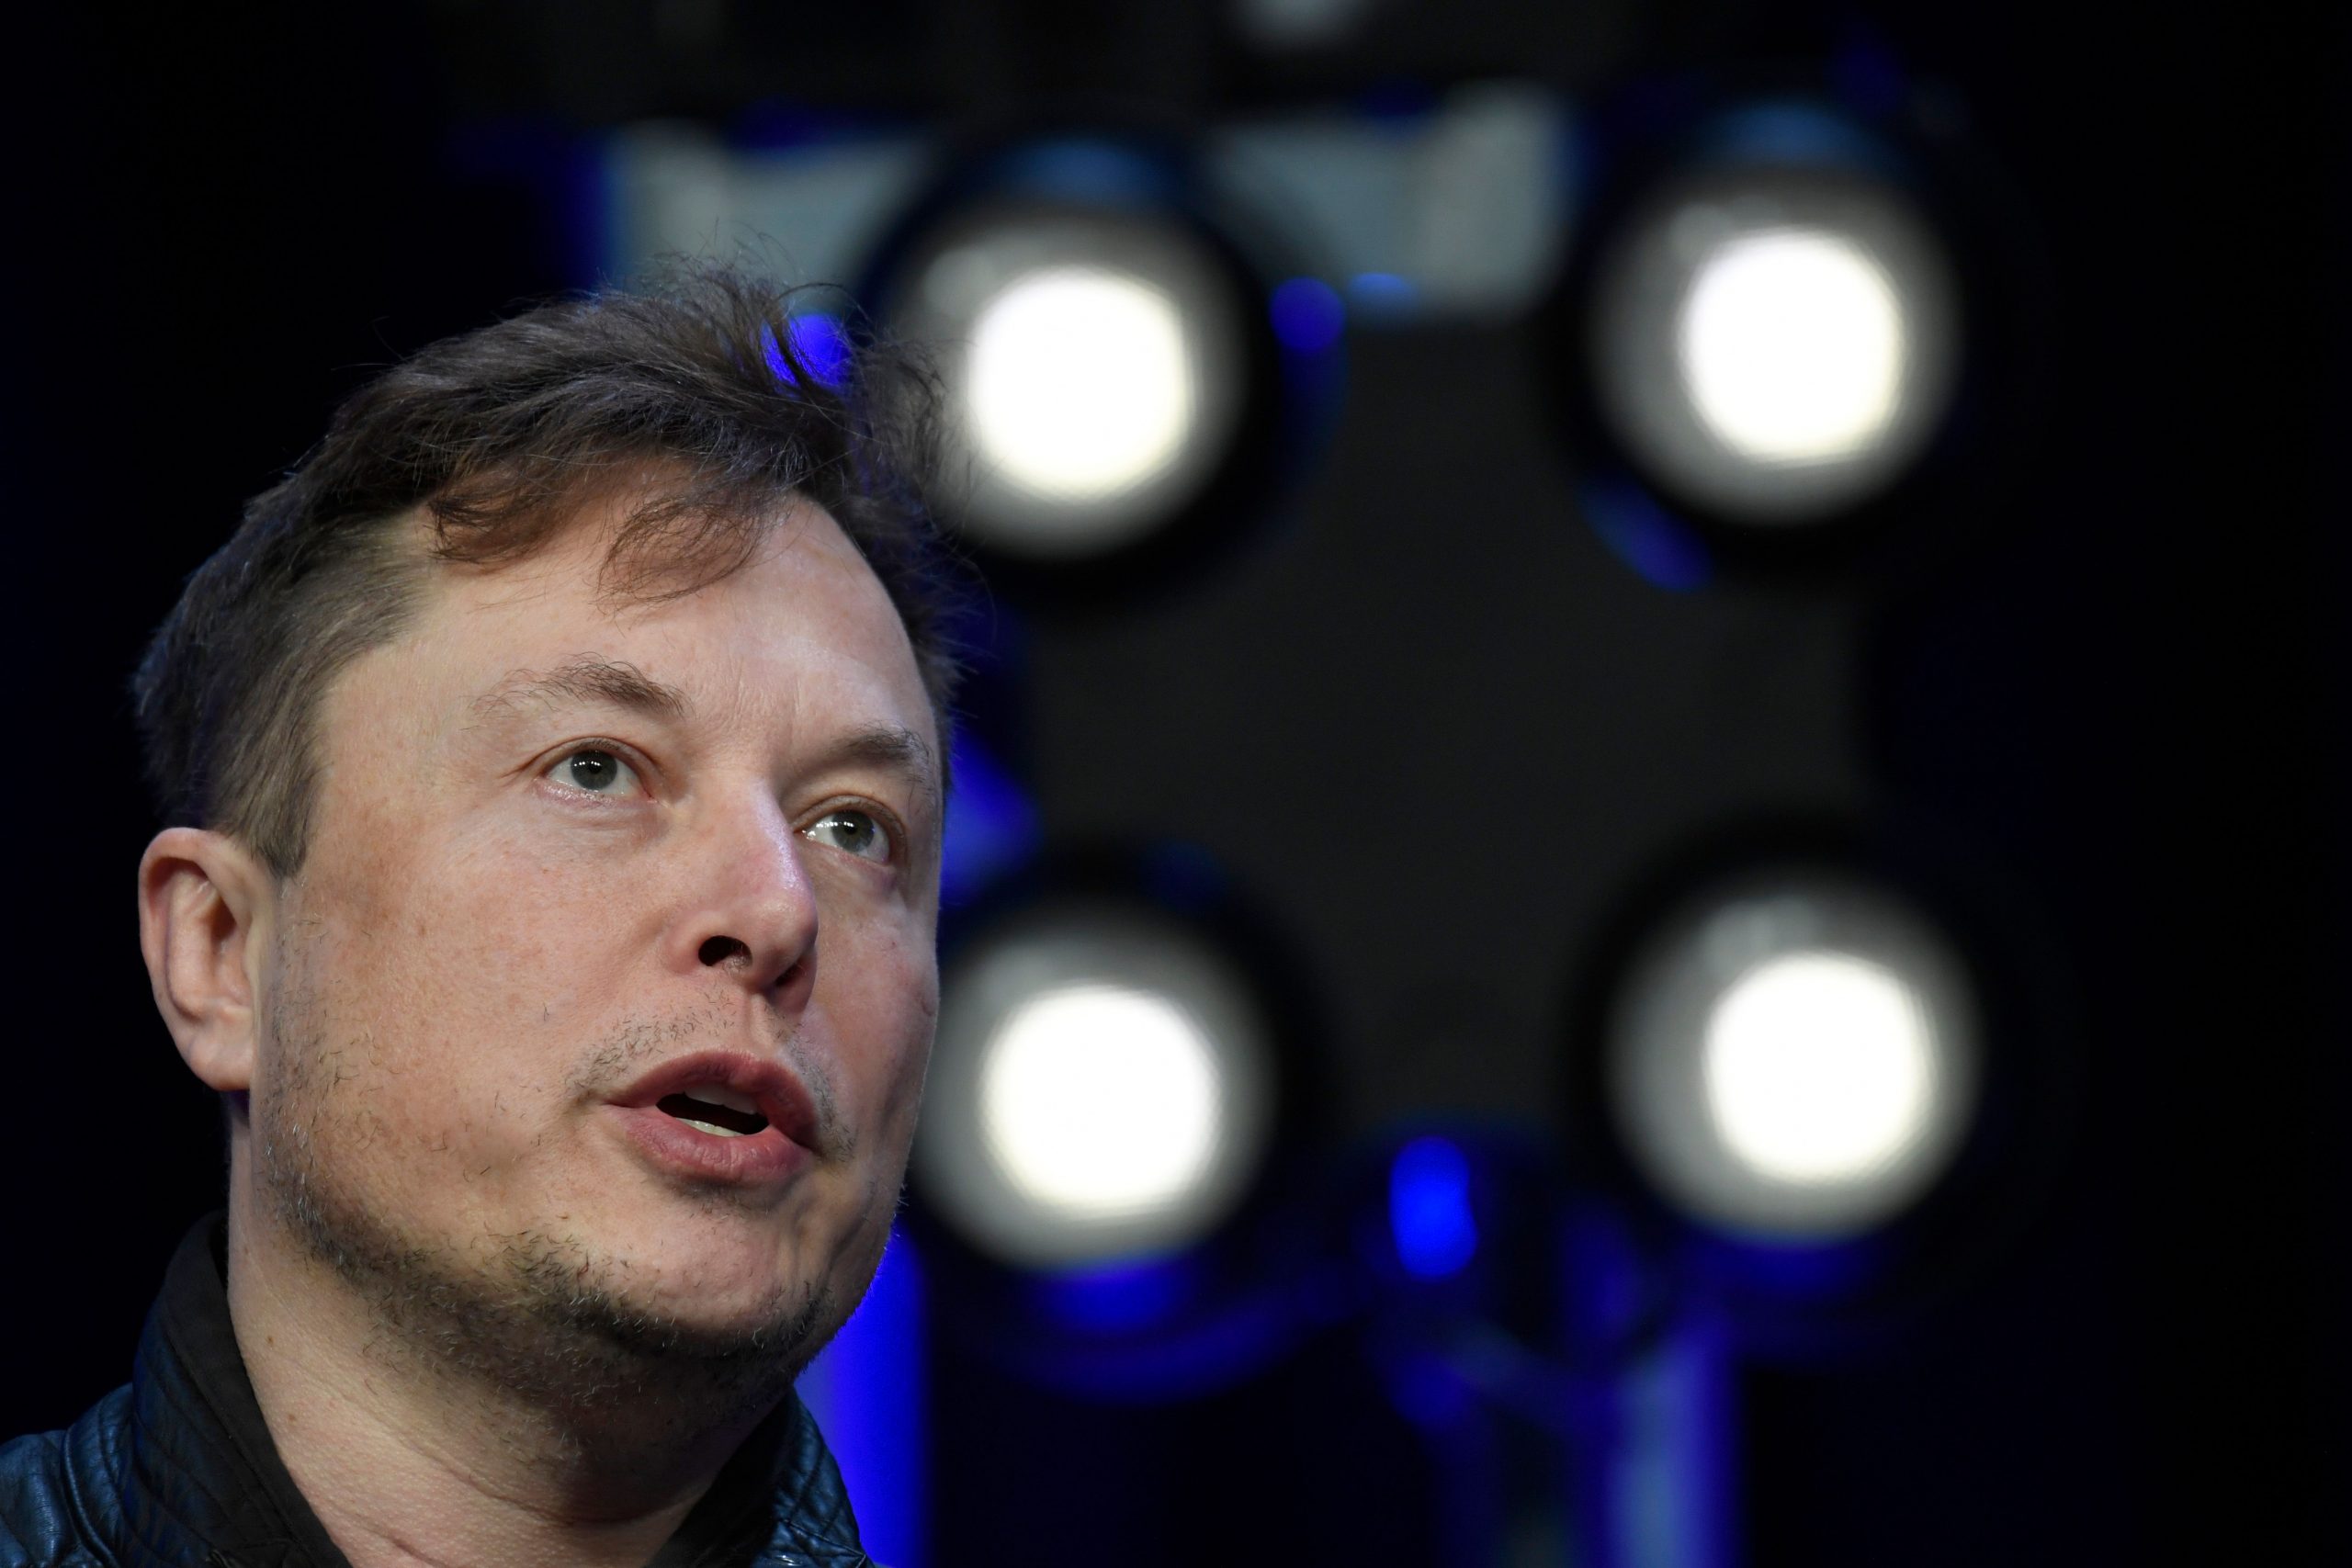 SpaceX, Tesla and now Twitter: The many businesses of Elon Musk